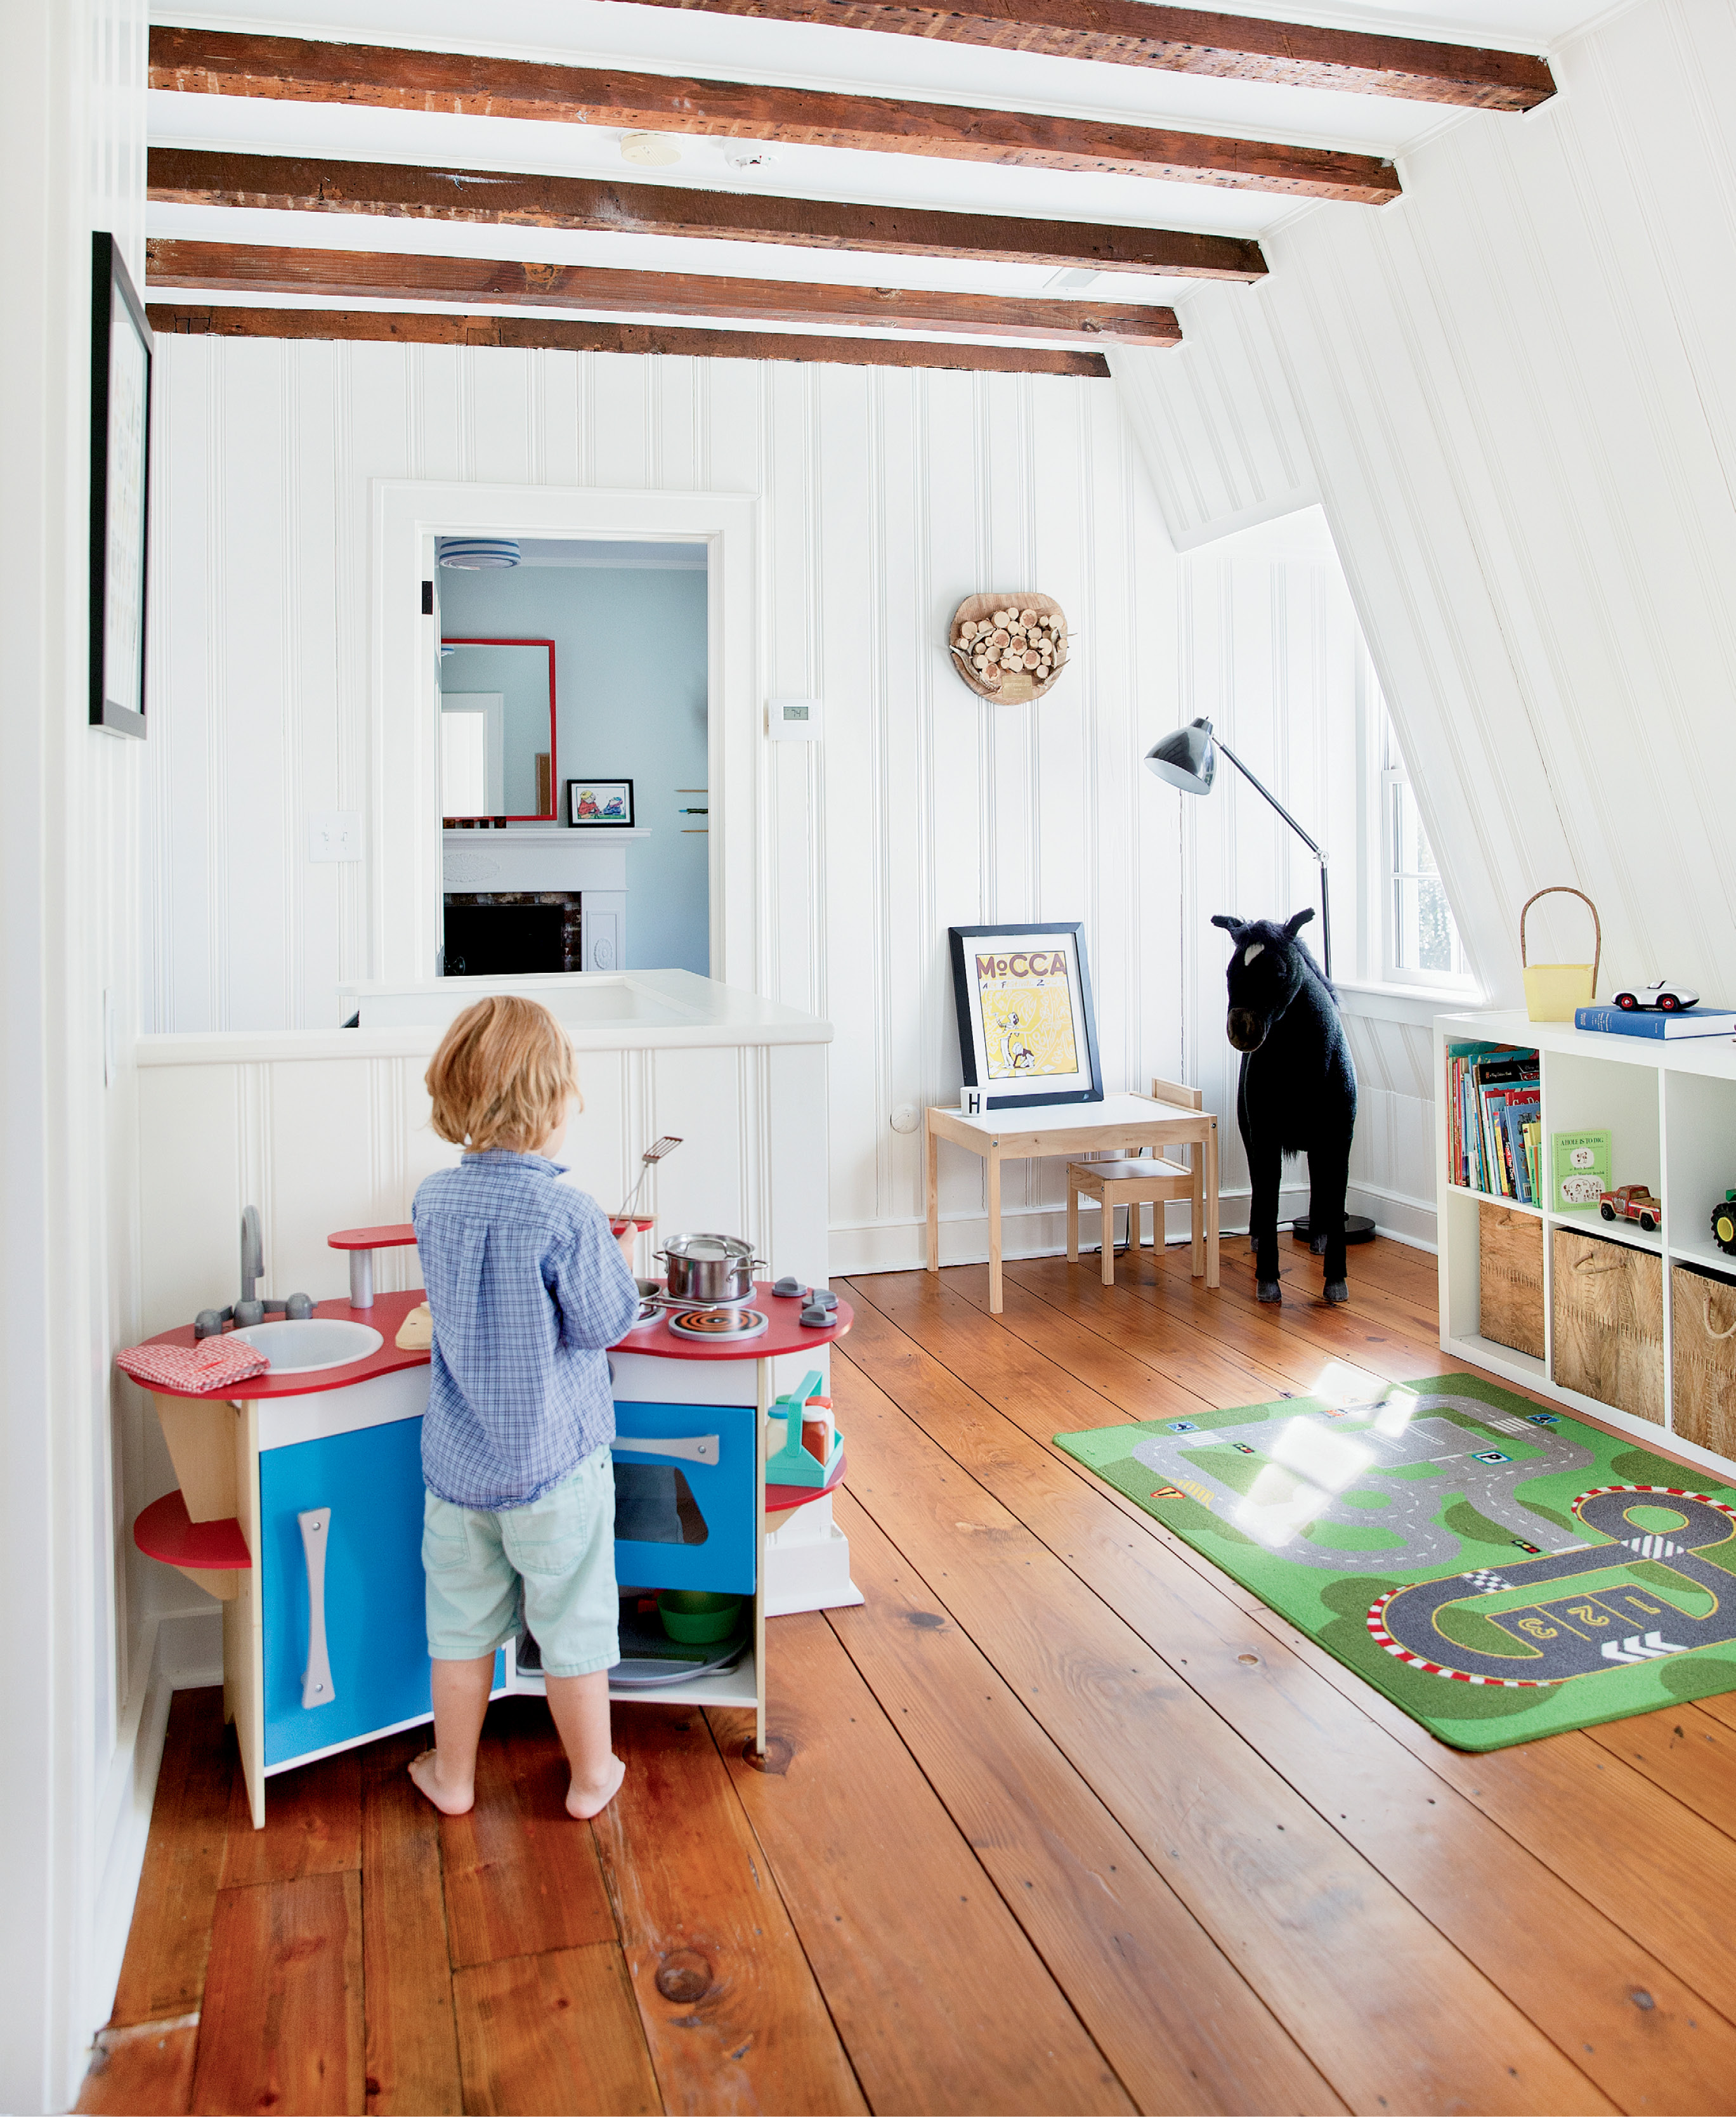 Henry whips up some pretend grub in his playroom, which retains its 18th-century footprint, as does his adjoining bedroom.